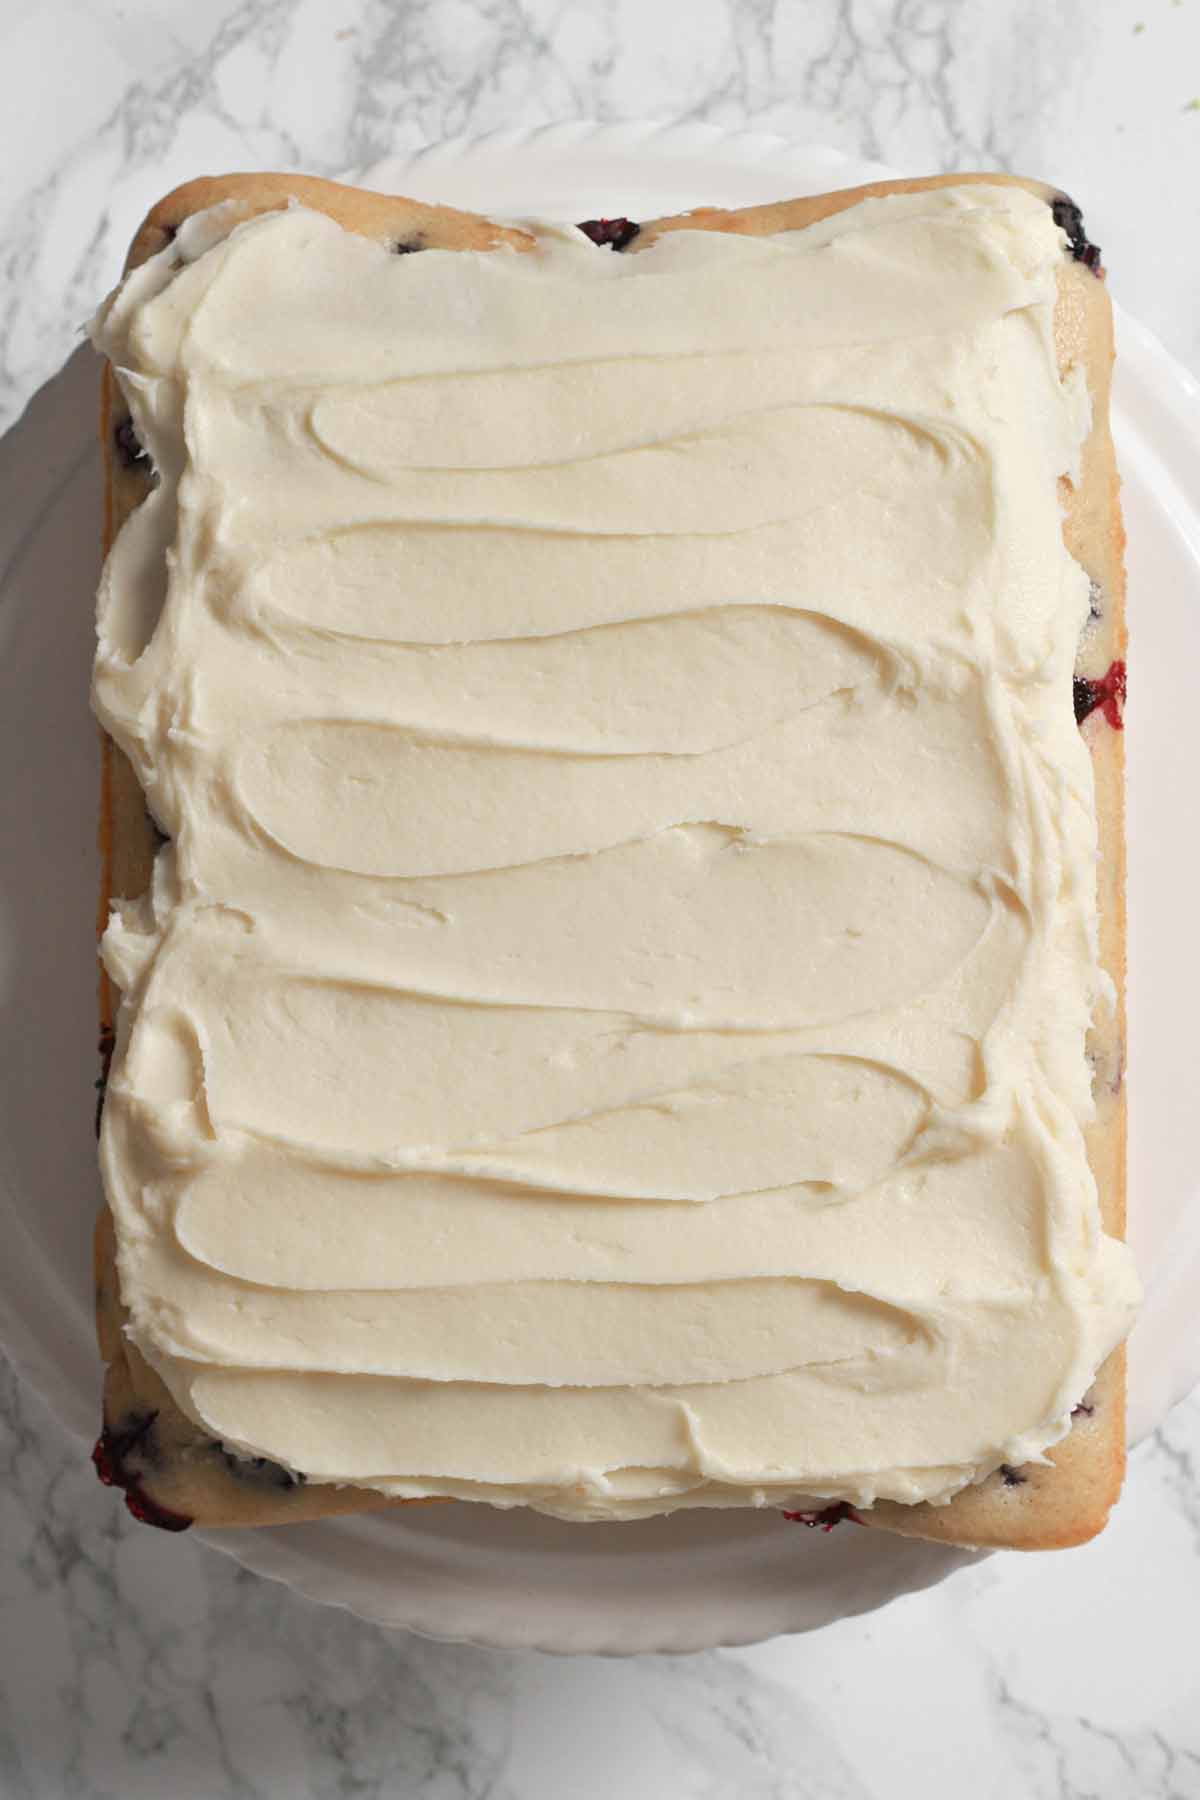 Whole Cake With Lemon Cream Cheese Frosting On Top